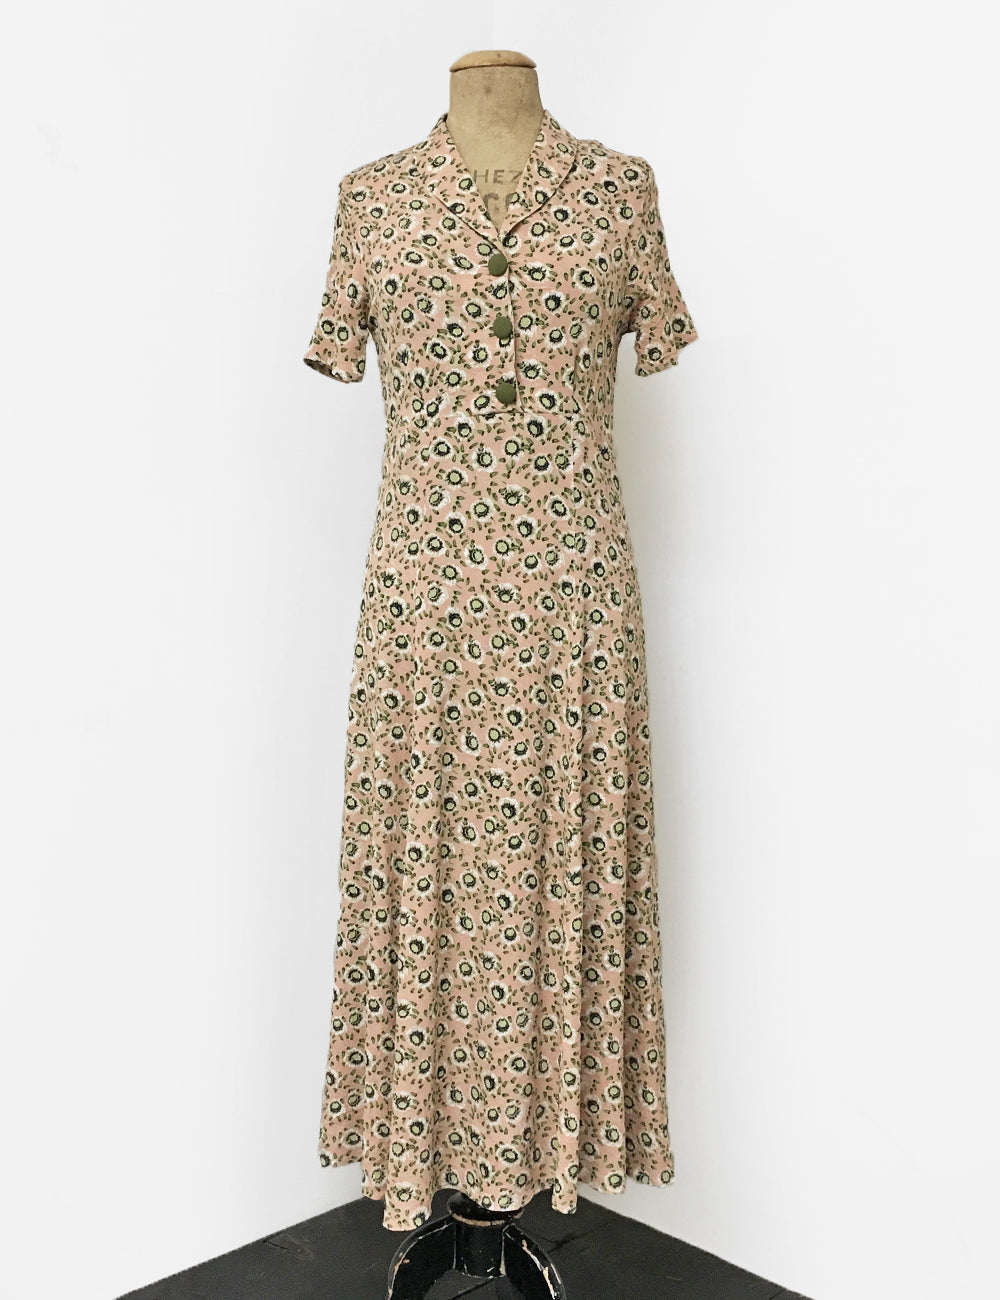 1940s Vintage Tea Length Short Sleeve Day Dress in Dusty Pink & Green Pansy Floral